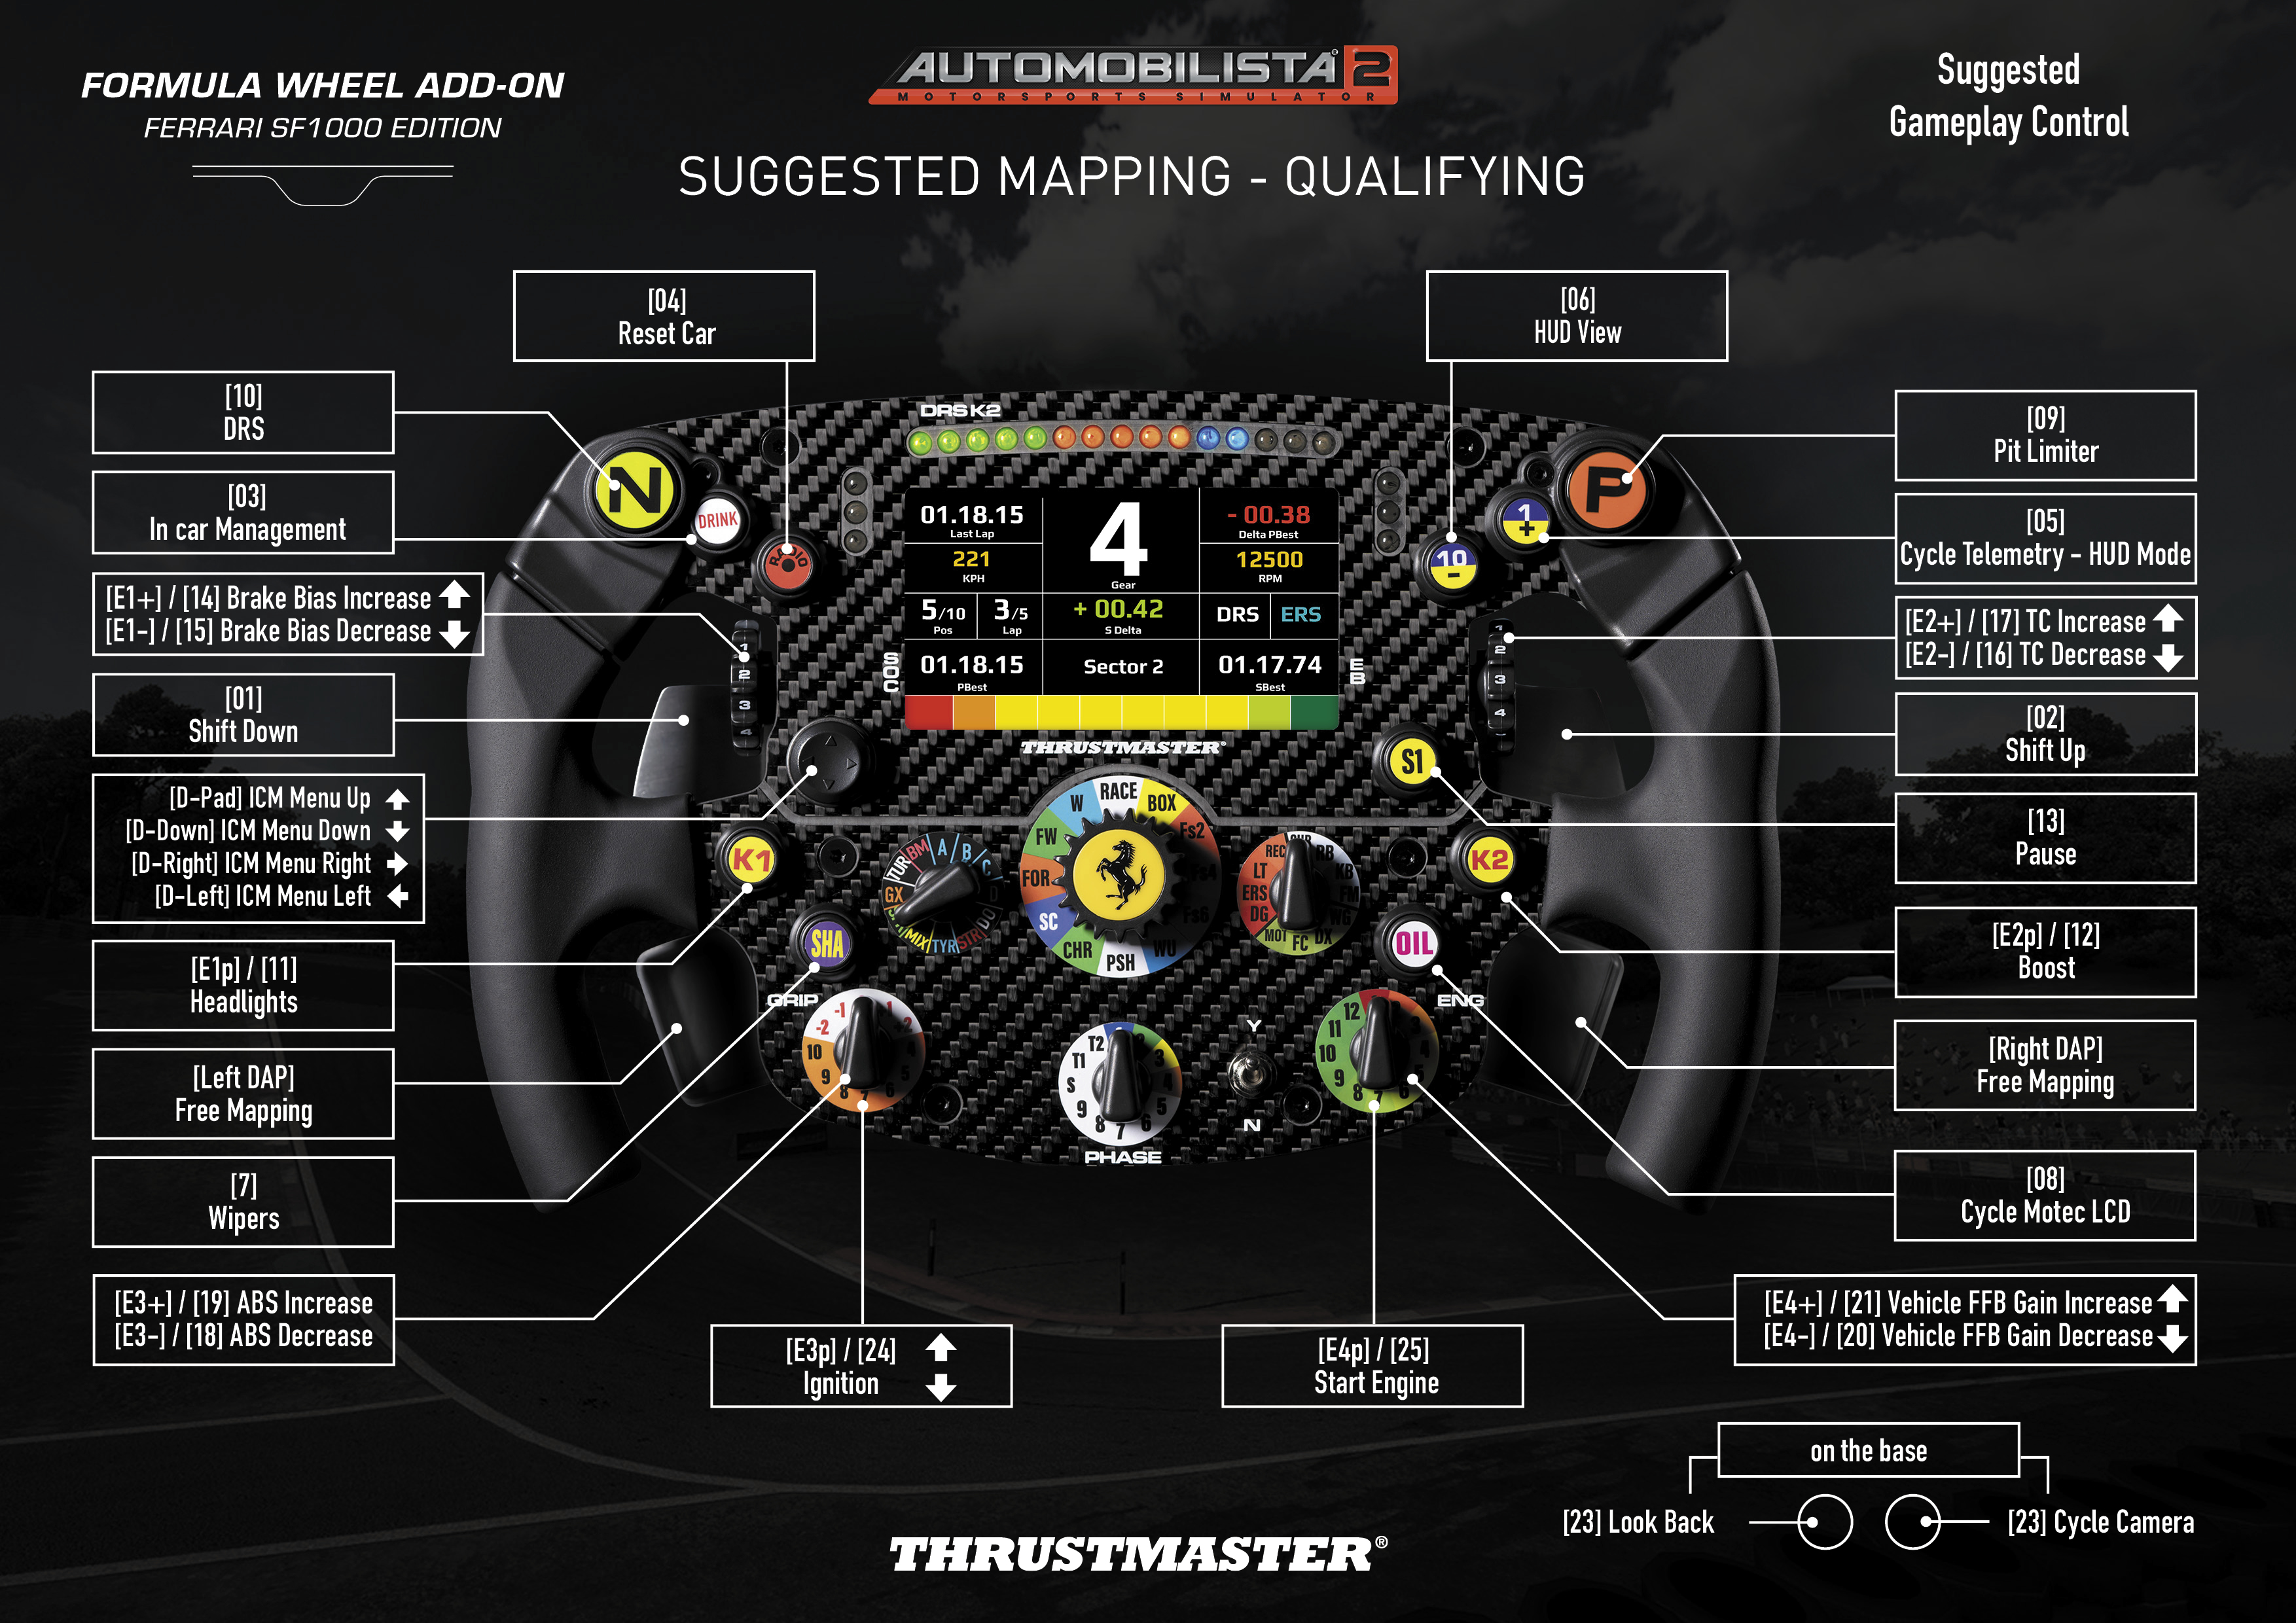 Thrustmaster Official on X: Great news! The Formula Wheel Add-On